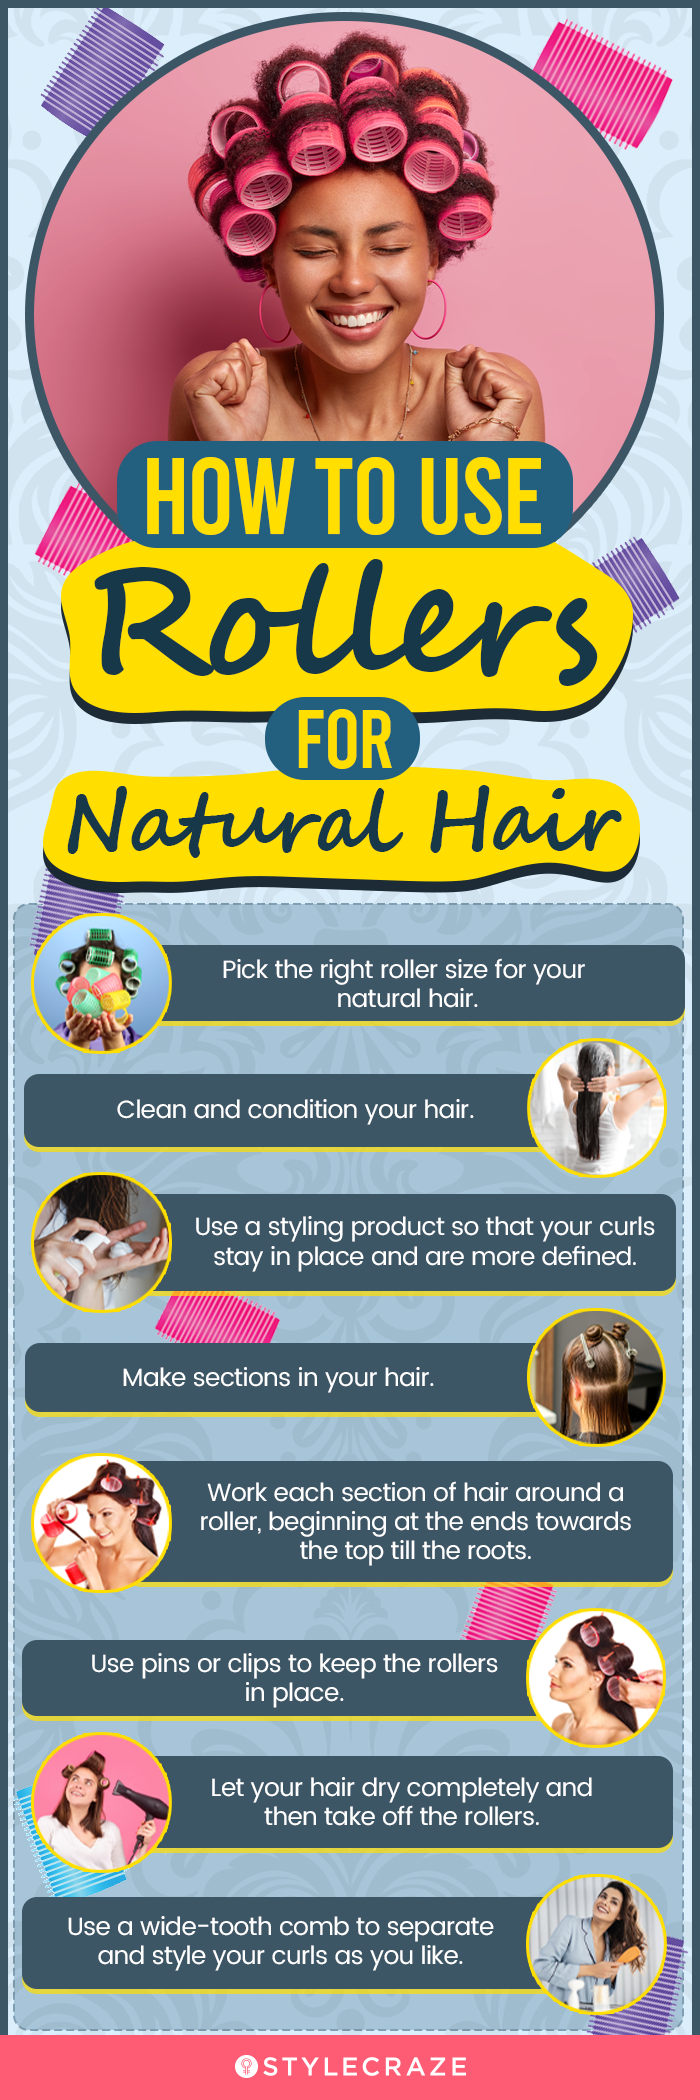 How To Use Rollers For Natural Hair (infographic)